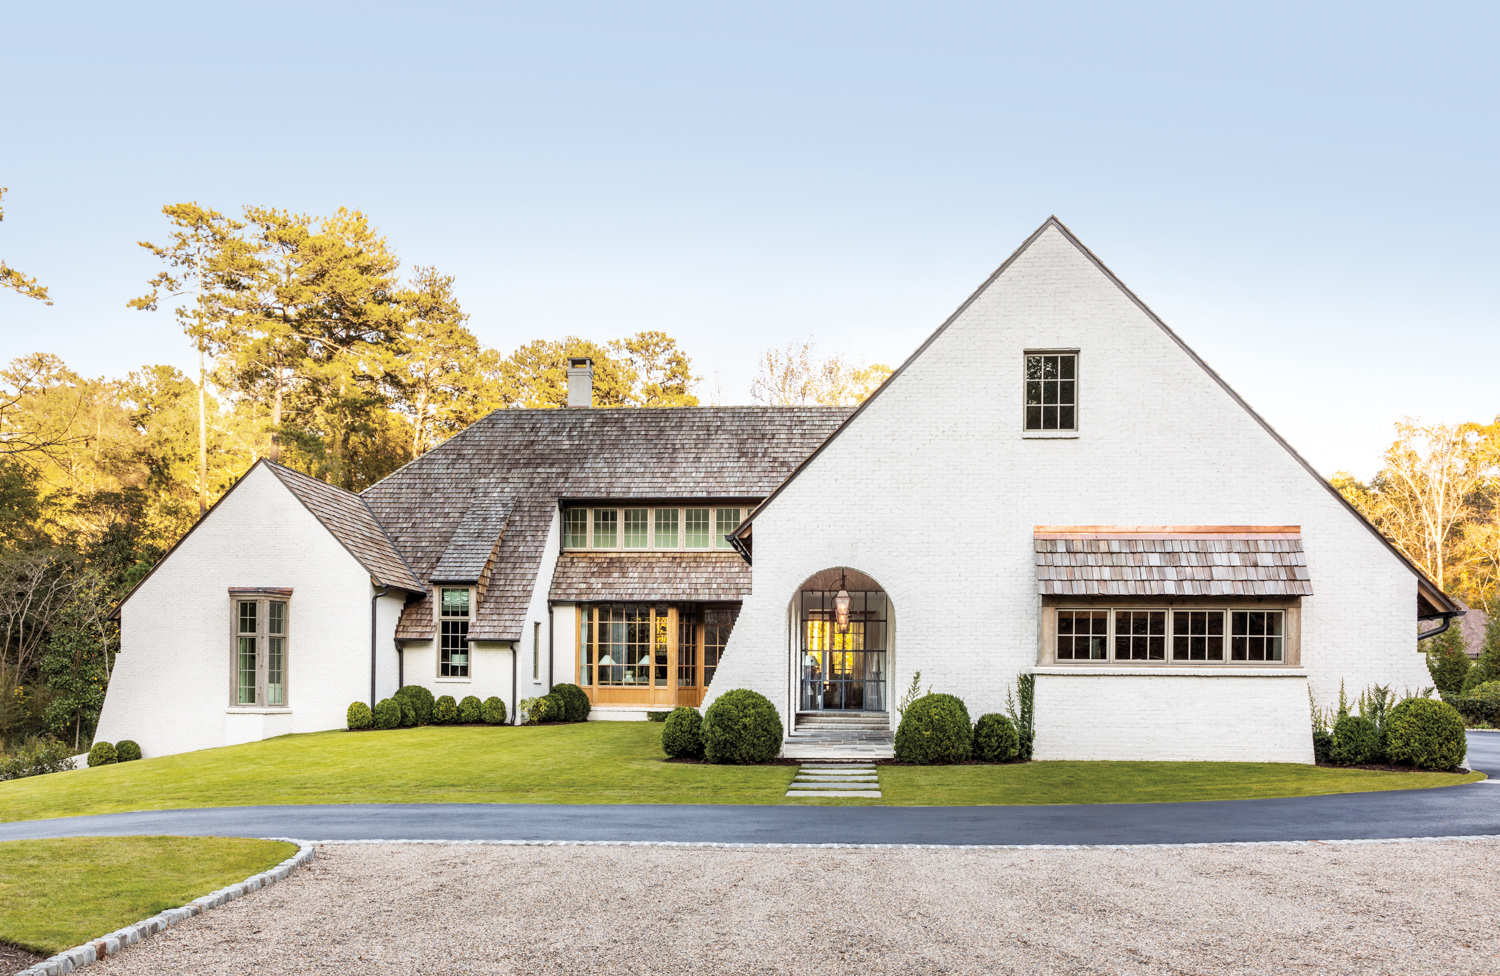 Belgian Farmhouse Notes Fuse With Arts & Crafts Elements In Atlanta